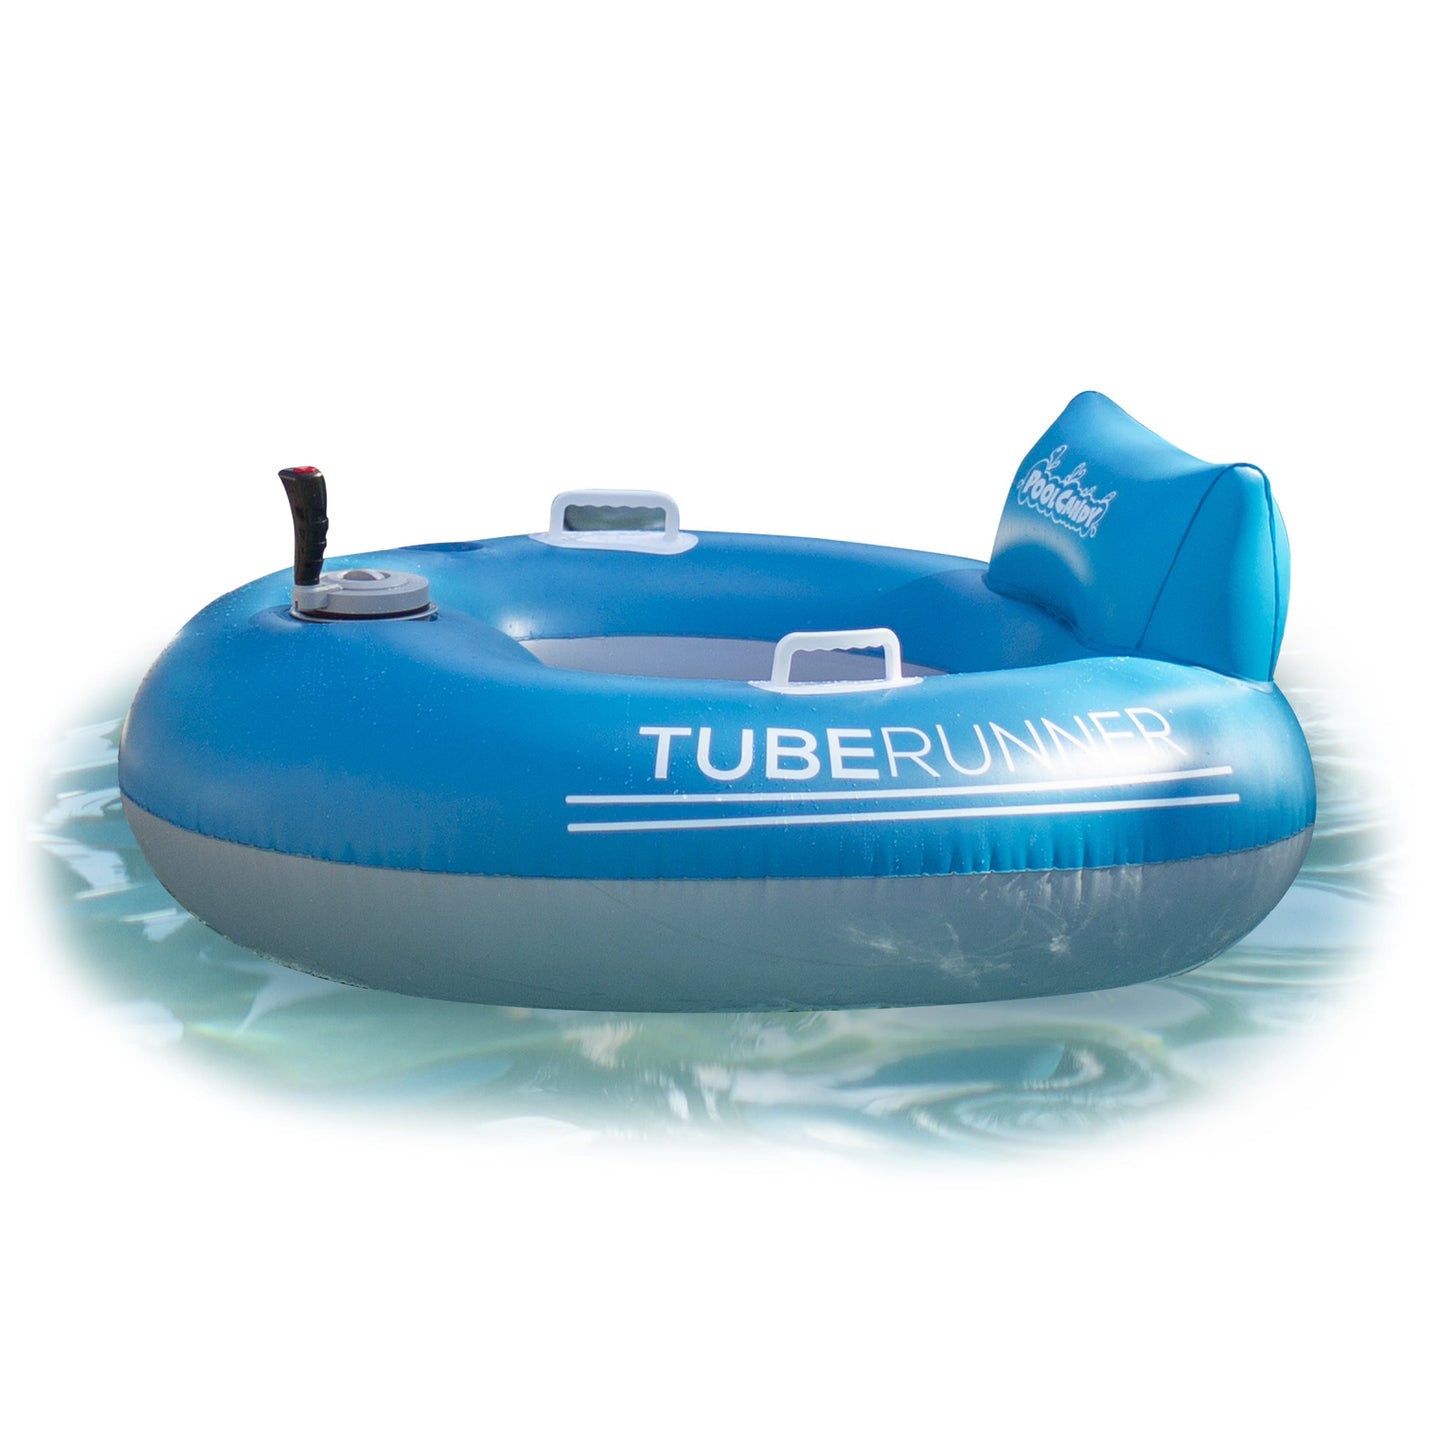 Tube Runner Motorized Pool Raft Replacement Only PoolCandy